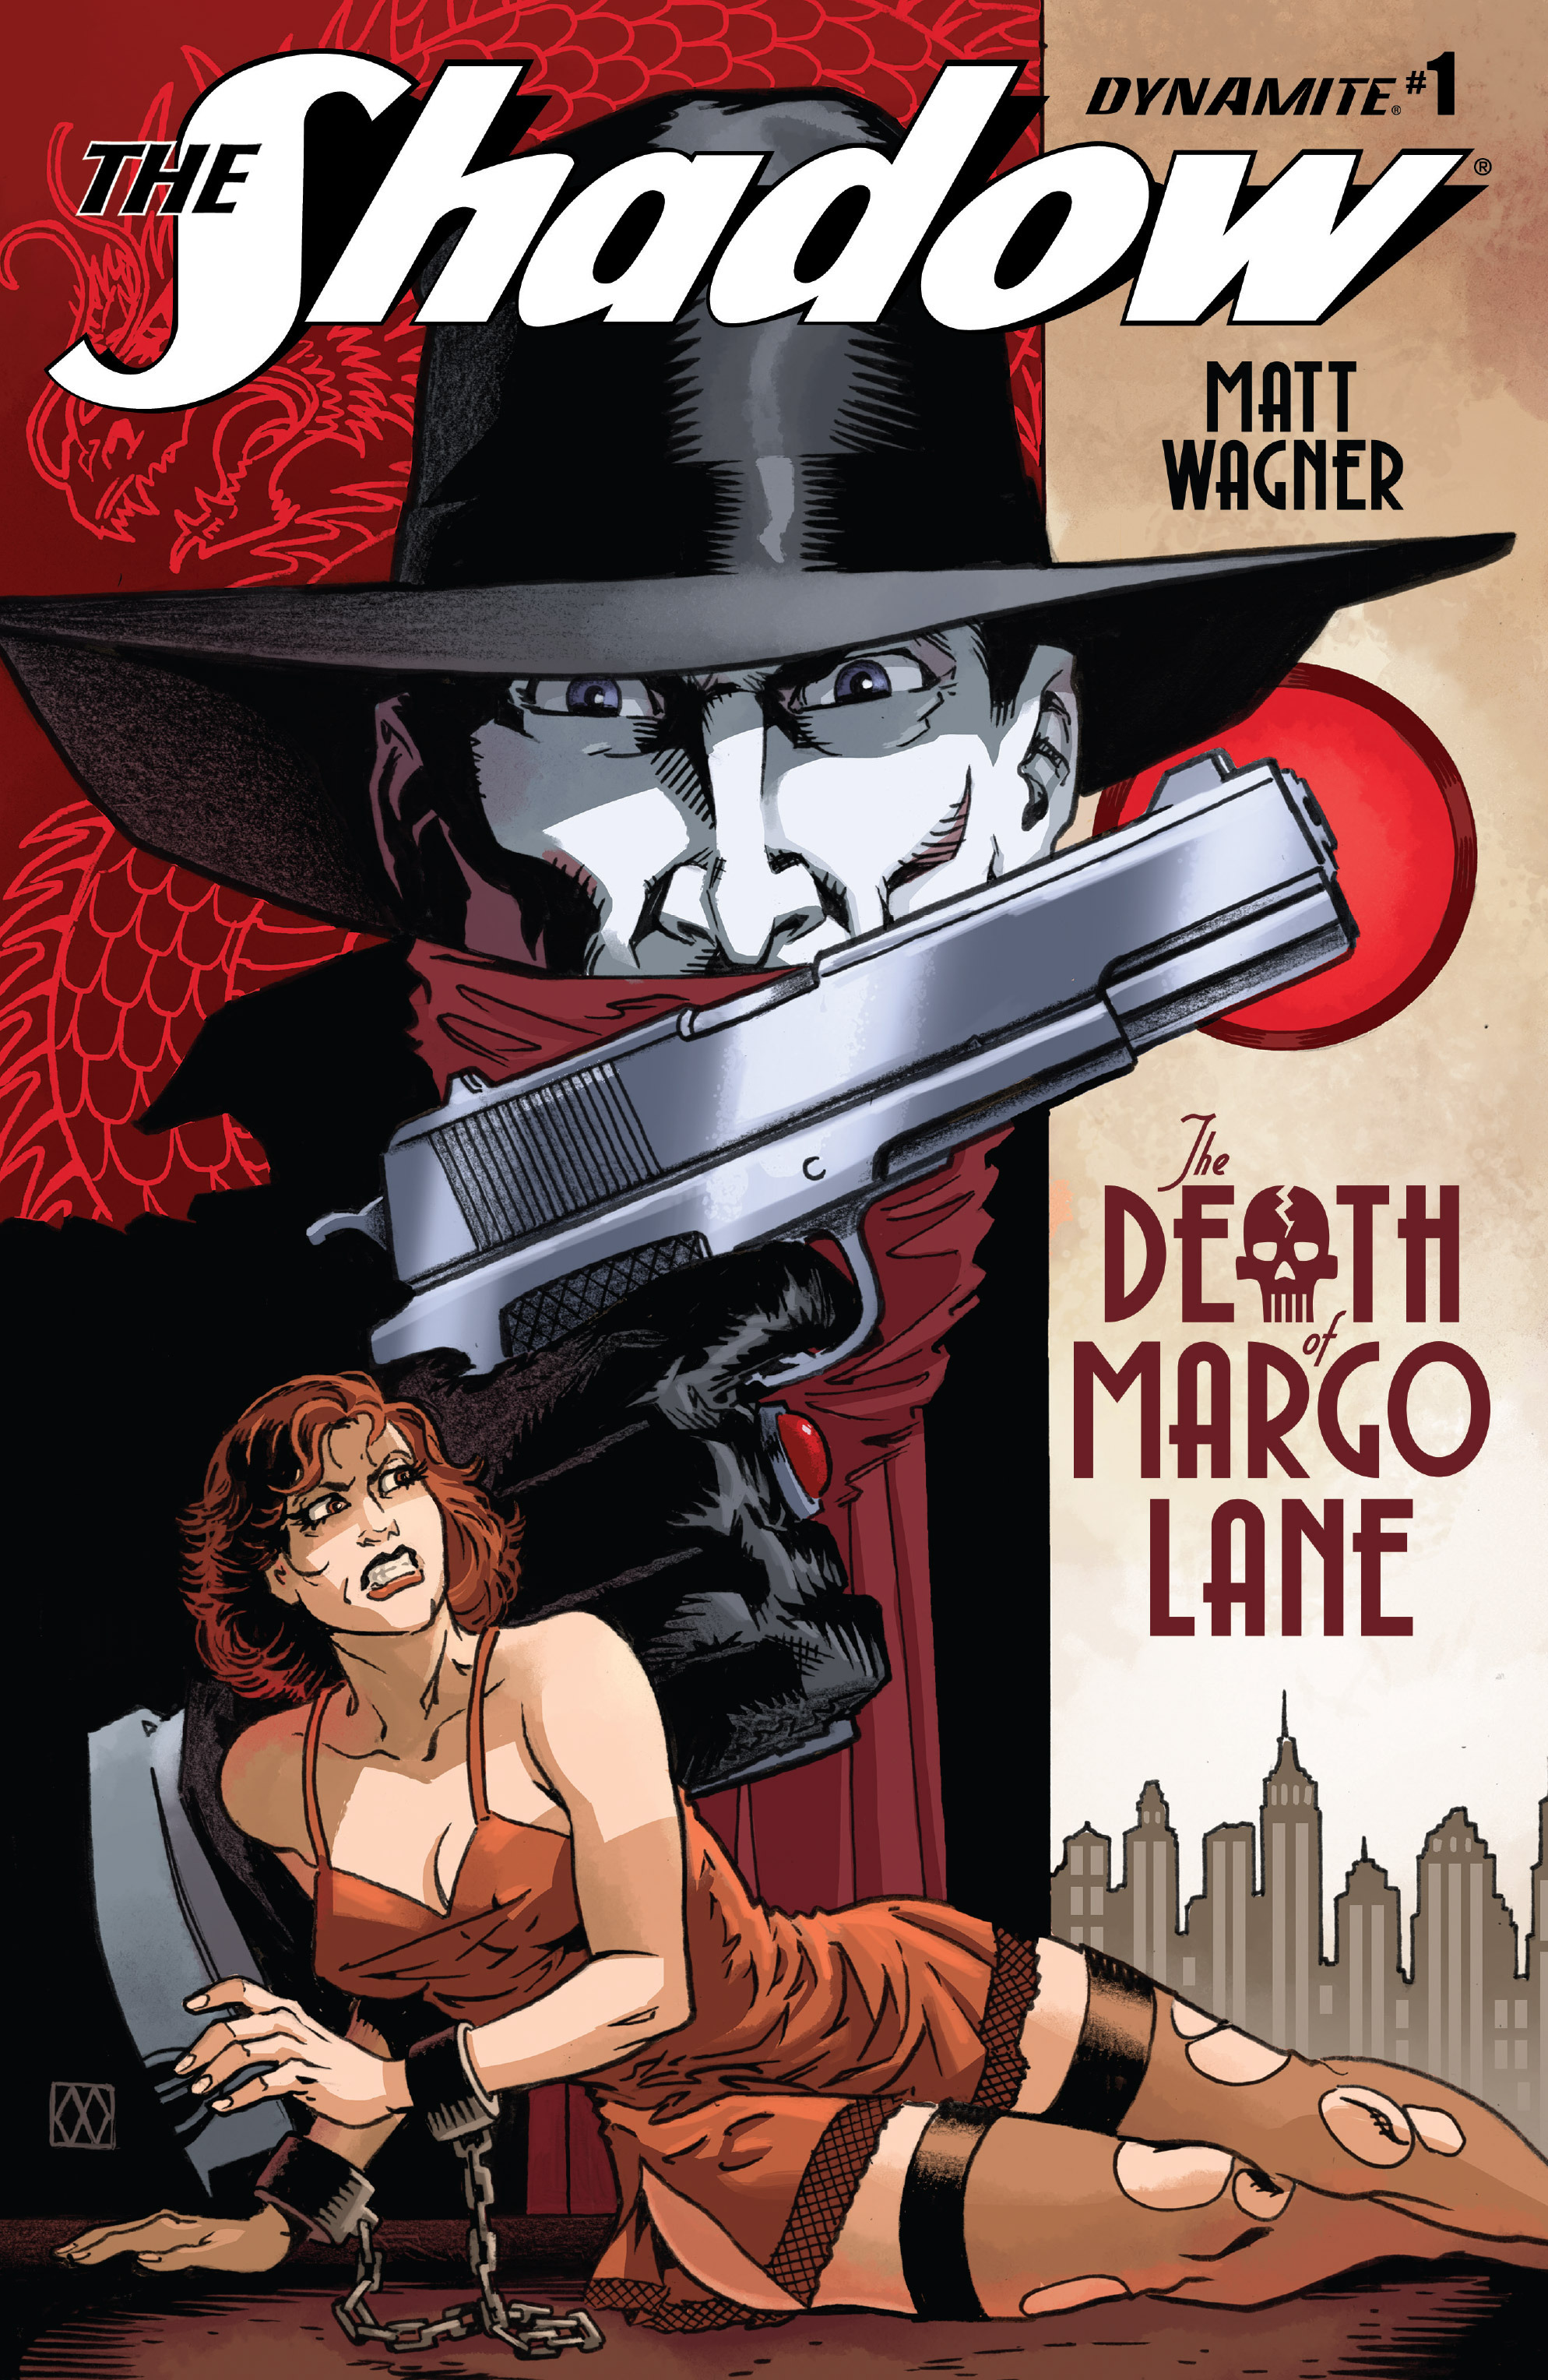 Read online The Shadow: The Death of Margot Lane comic -  Issue #1 - 1